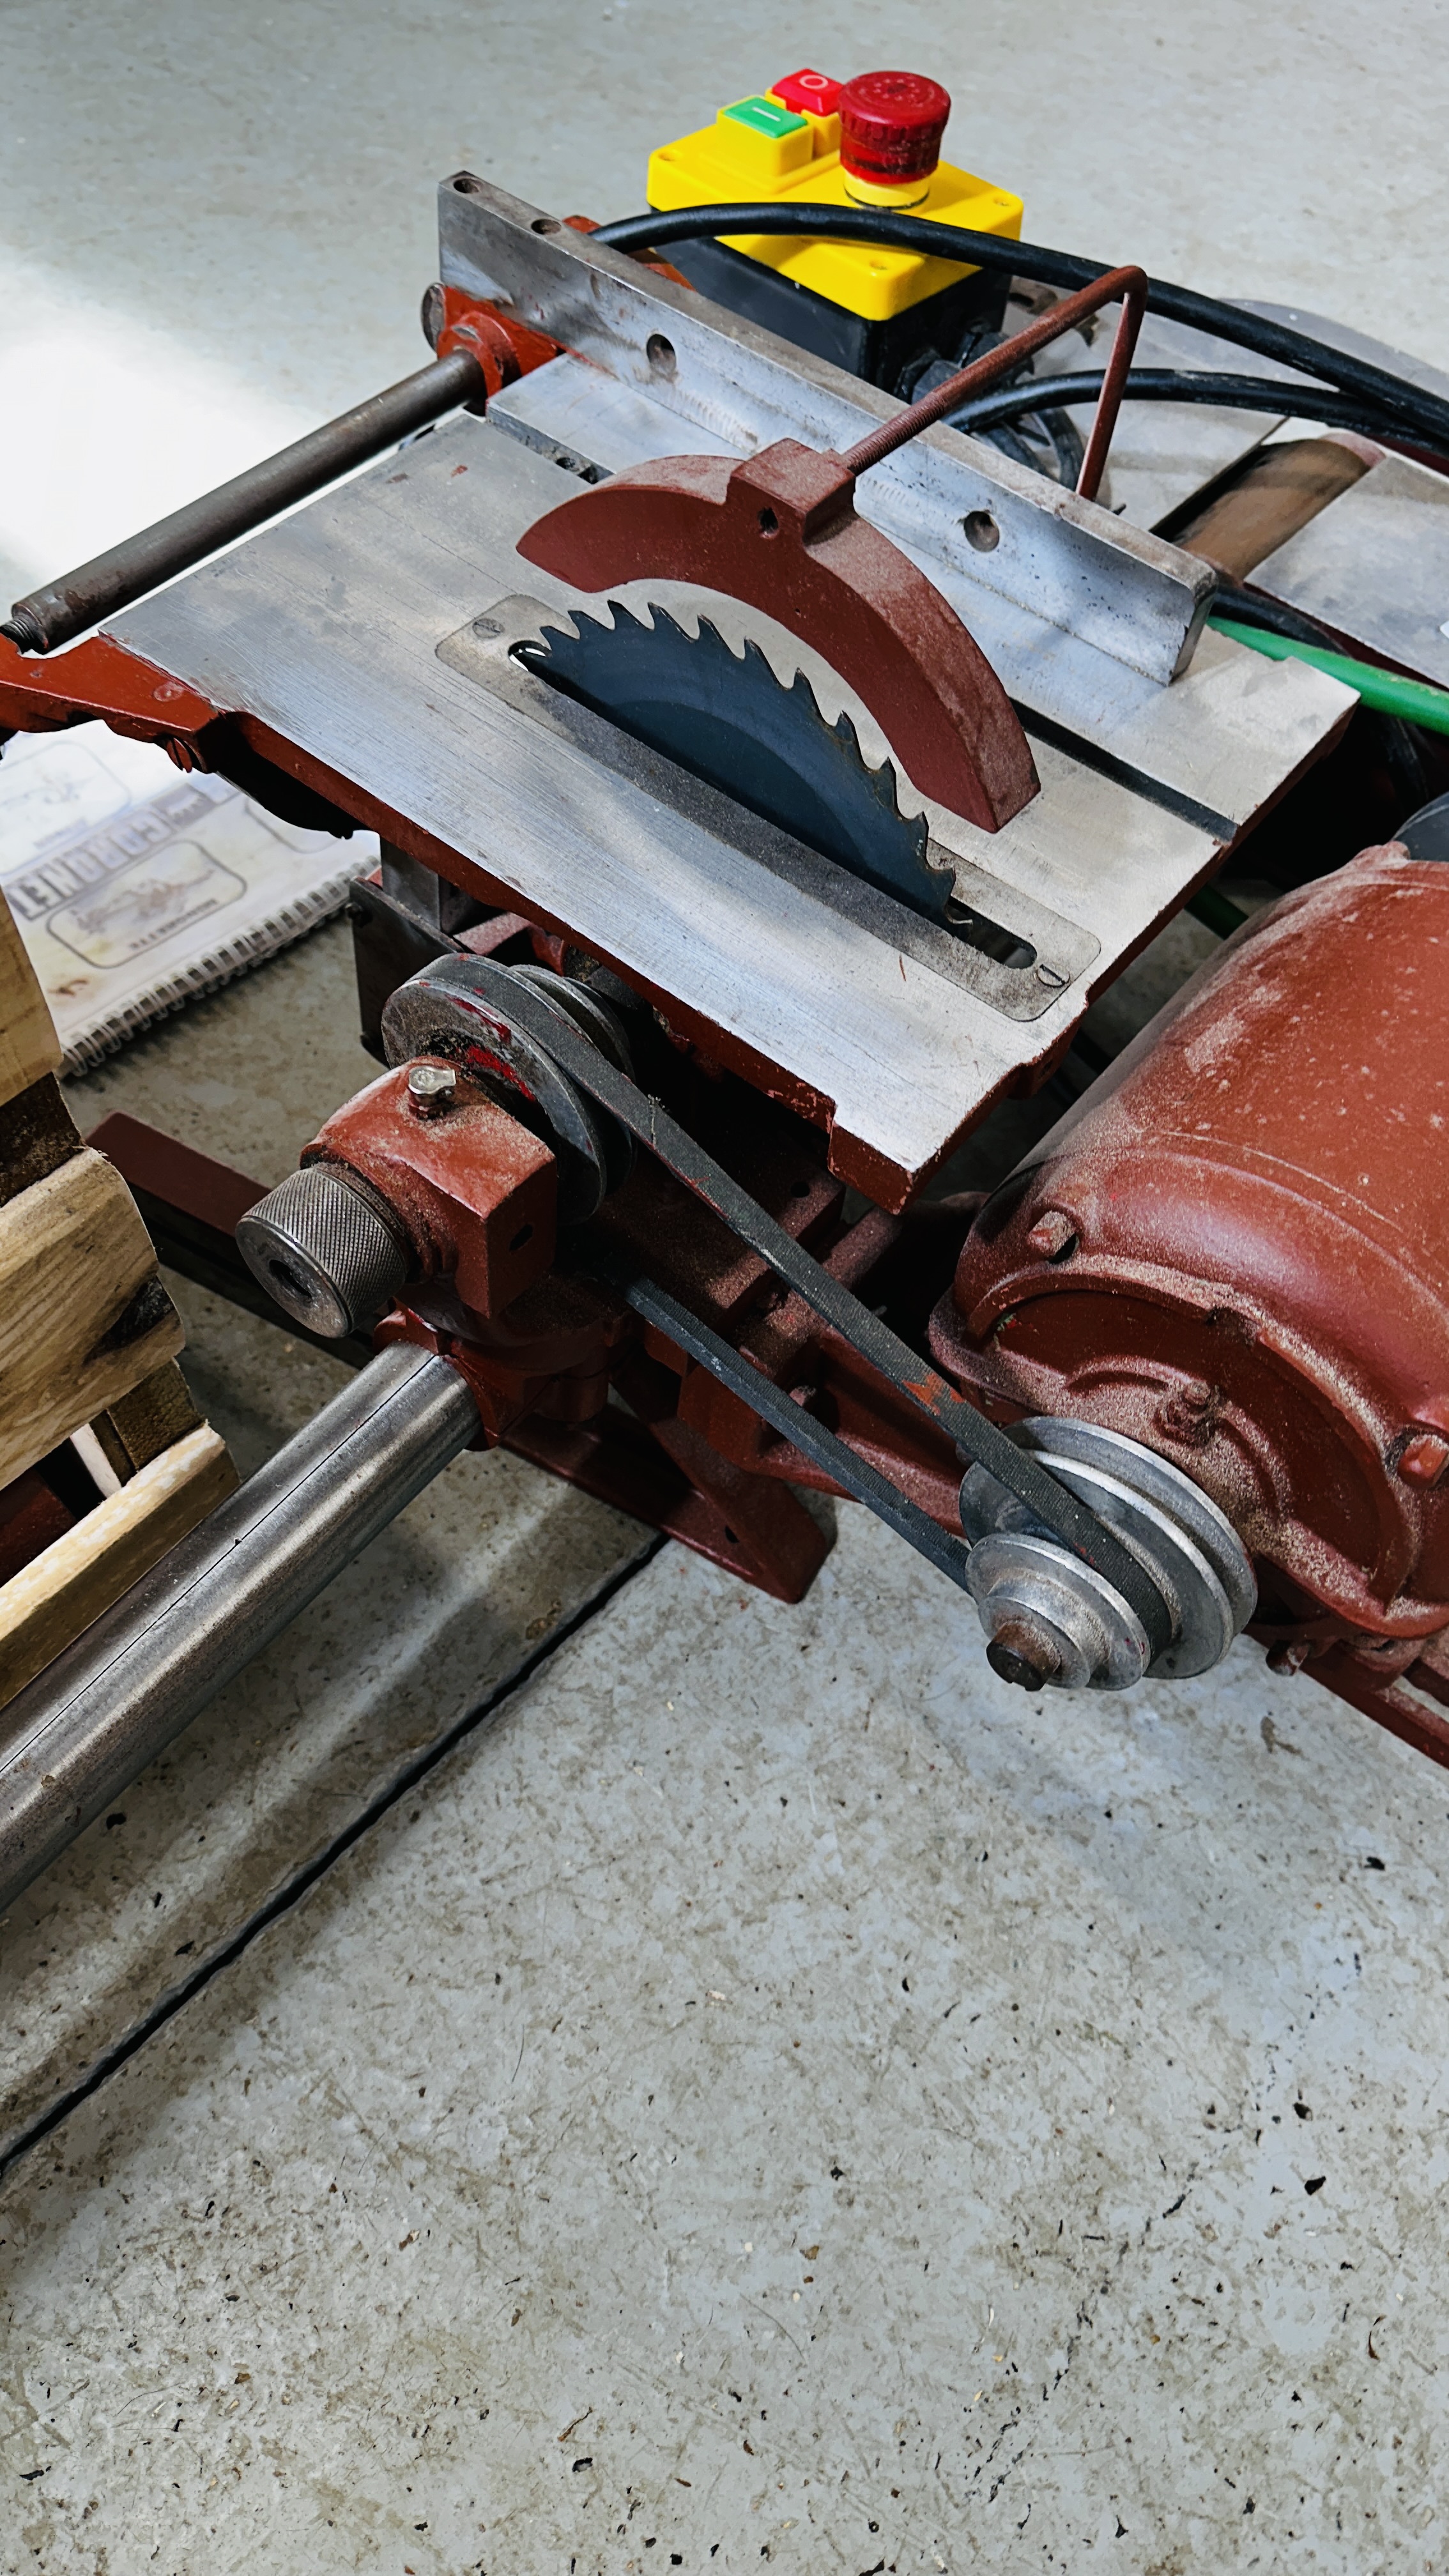 A CORONEE MINOR WOOD WORKING LATHE WITH ACCESSORIES - TRADE ONLY. - Image 11 of 17